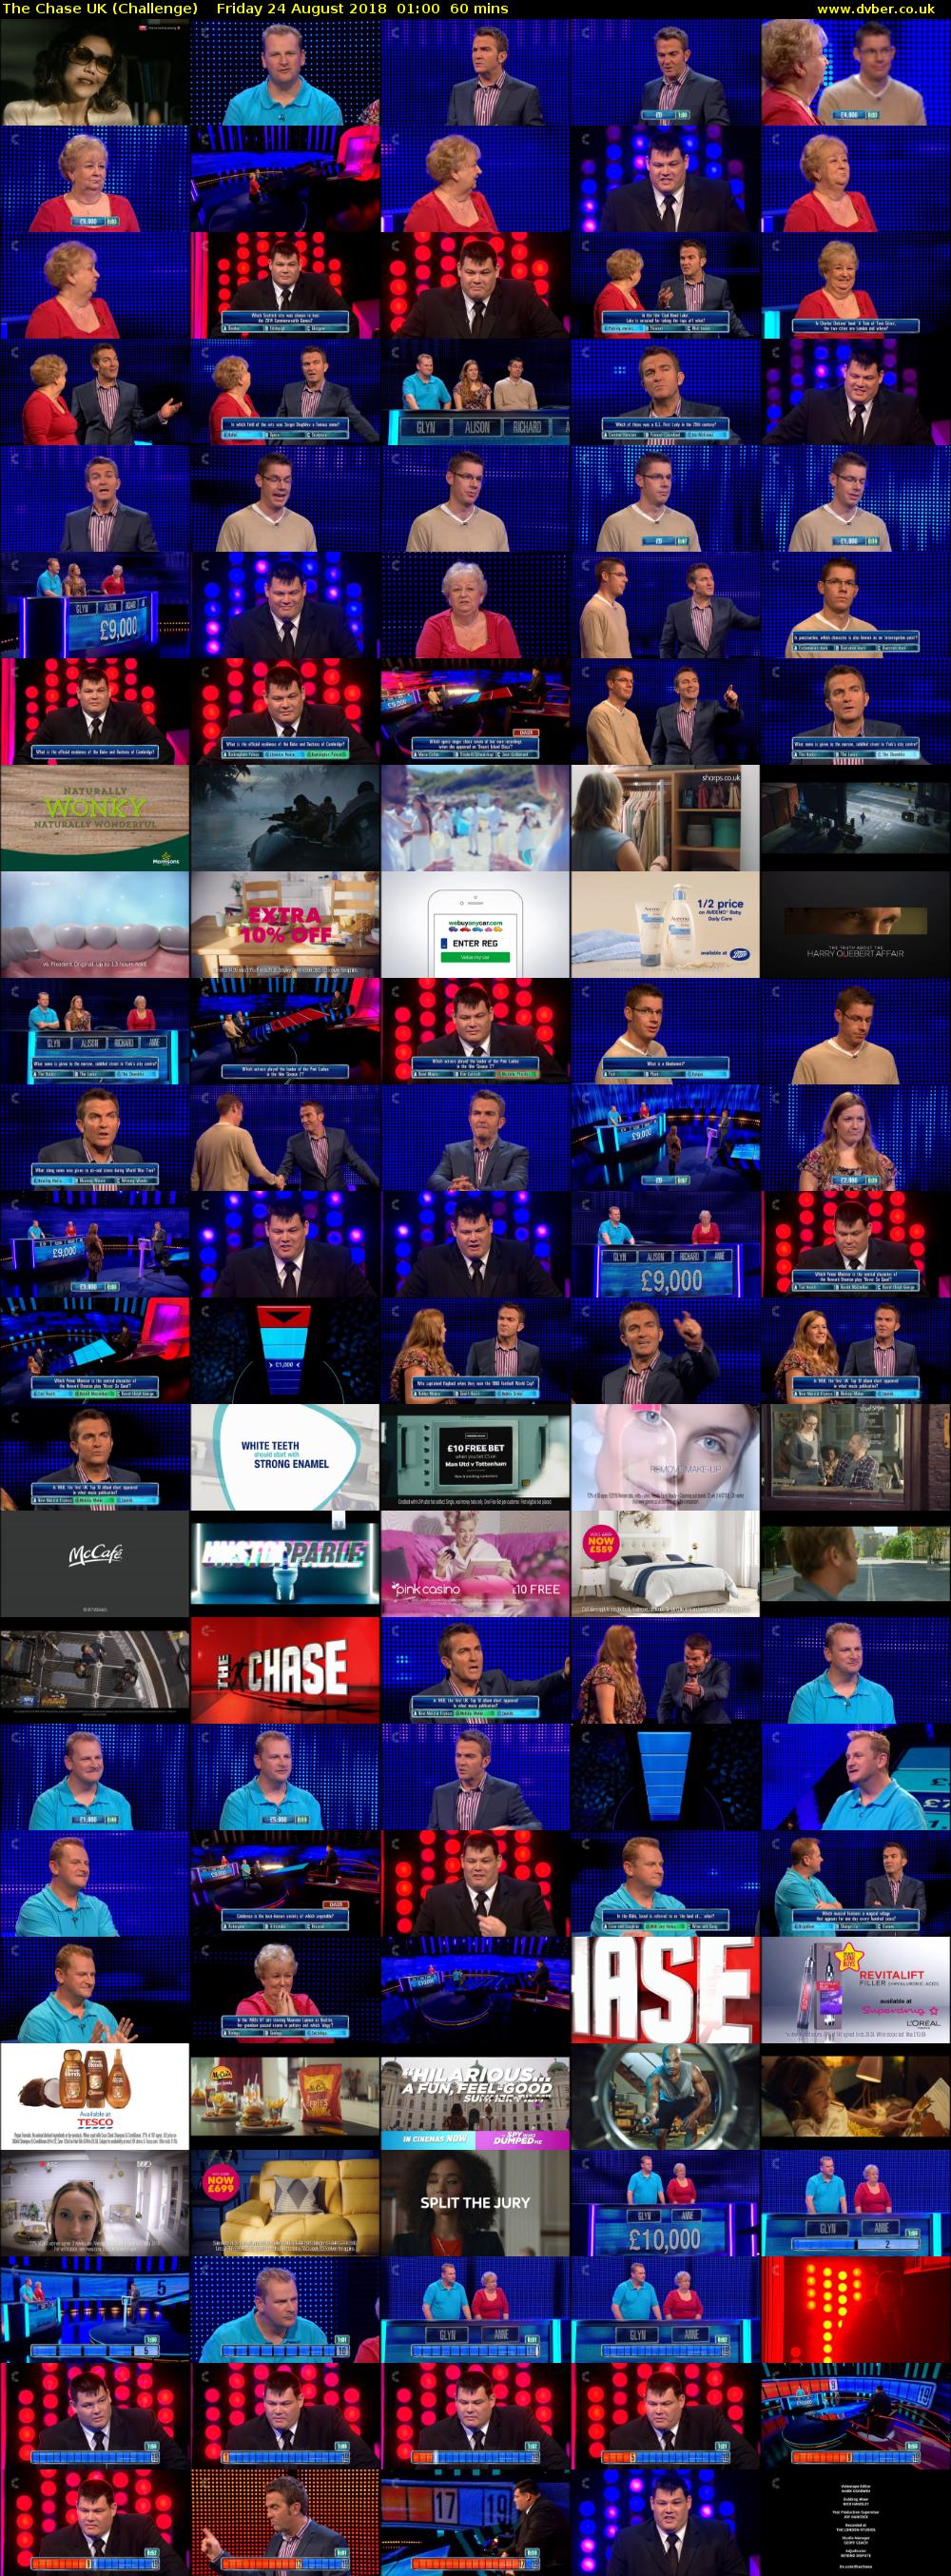 The Chase UK (Challenge) Friday 24 August 2018 01:00 - 02:00